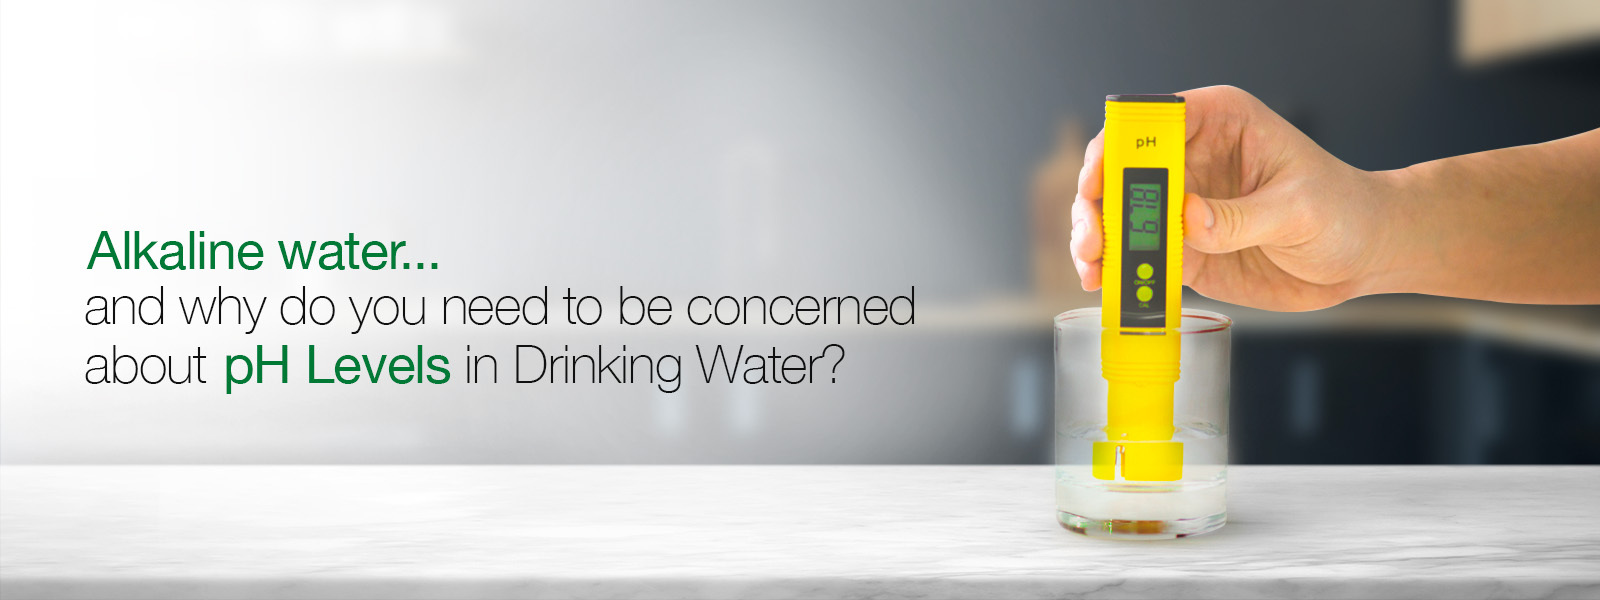 Alkaline water ….and why do you need to be concerned about pH Levels in Drinking Water?